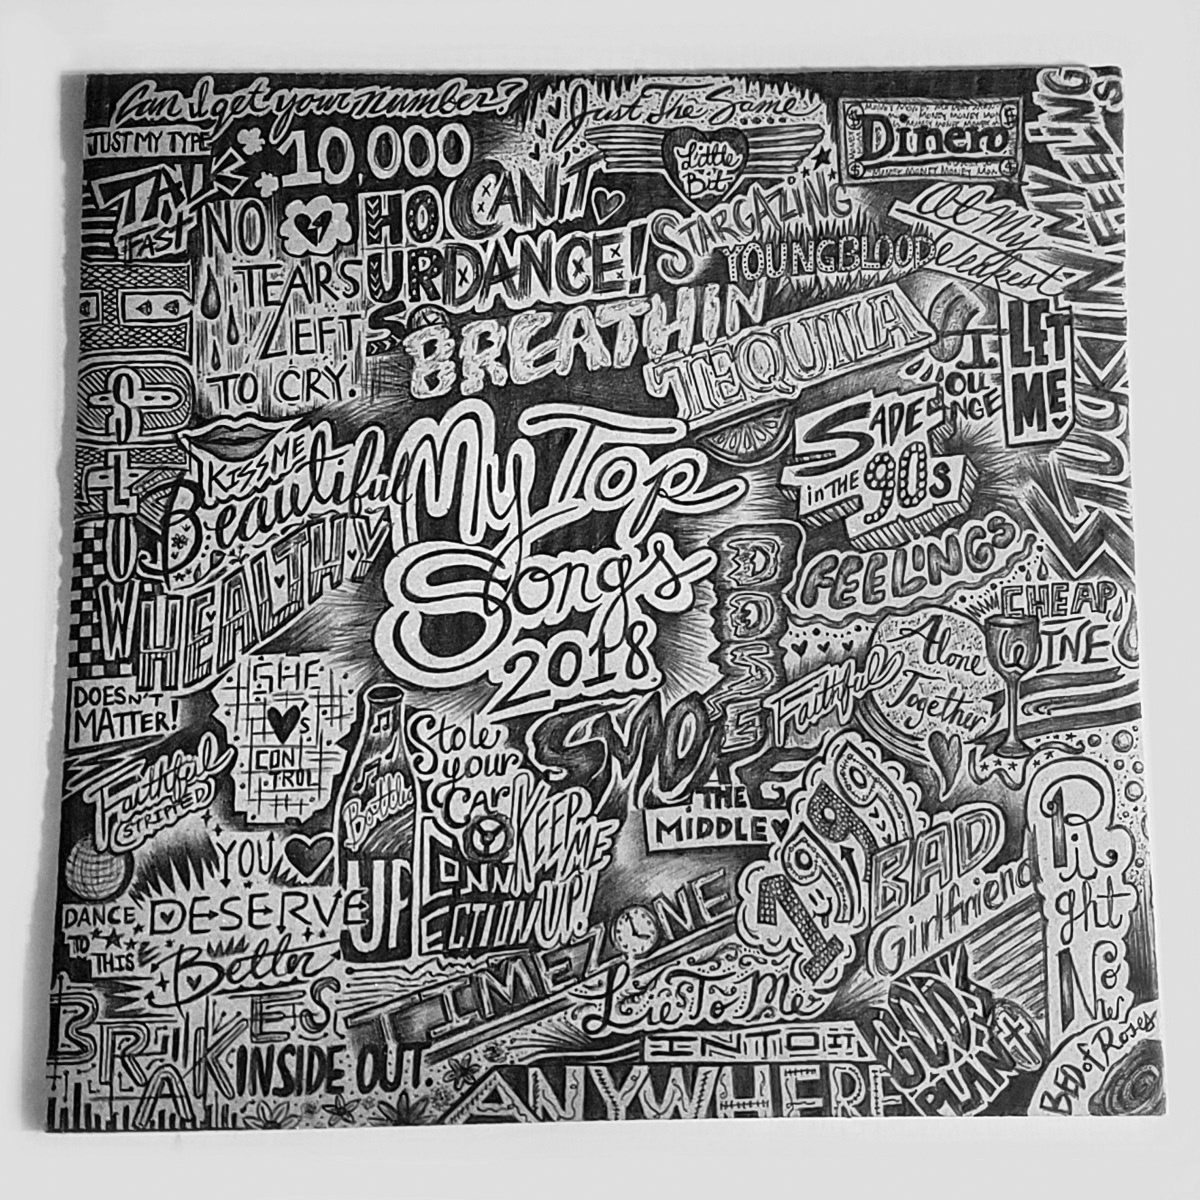 Lyrics music songs music artists HAND LETTERING lettering TRADITIONAL ART poster collage pen and ink